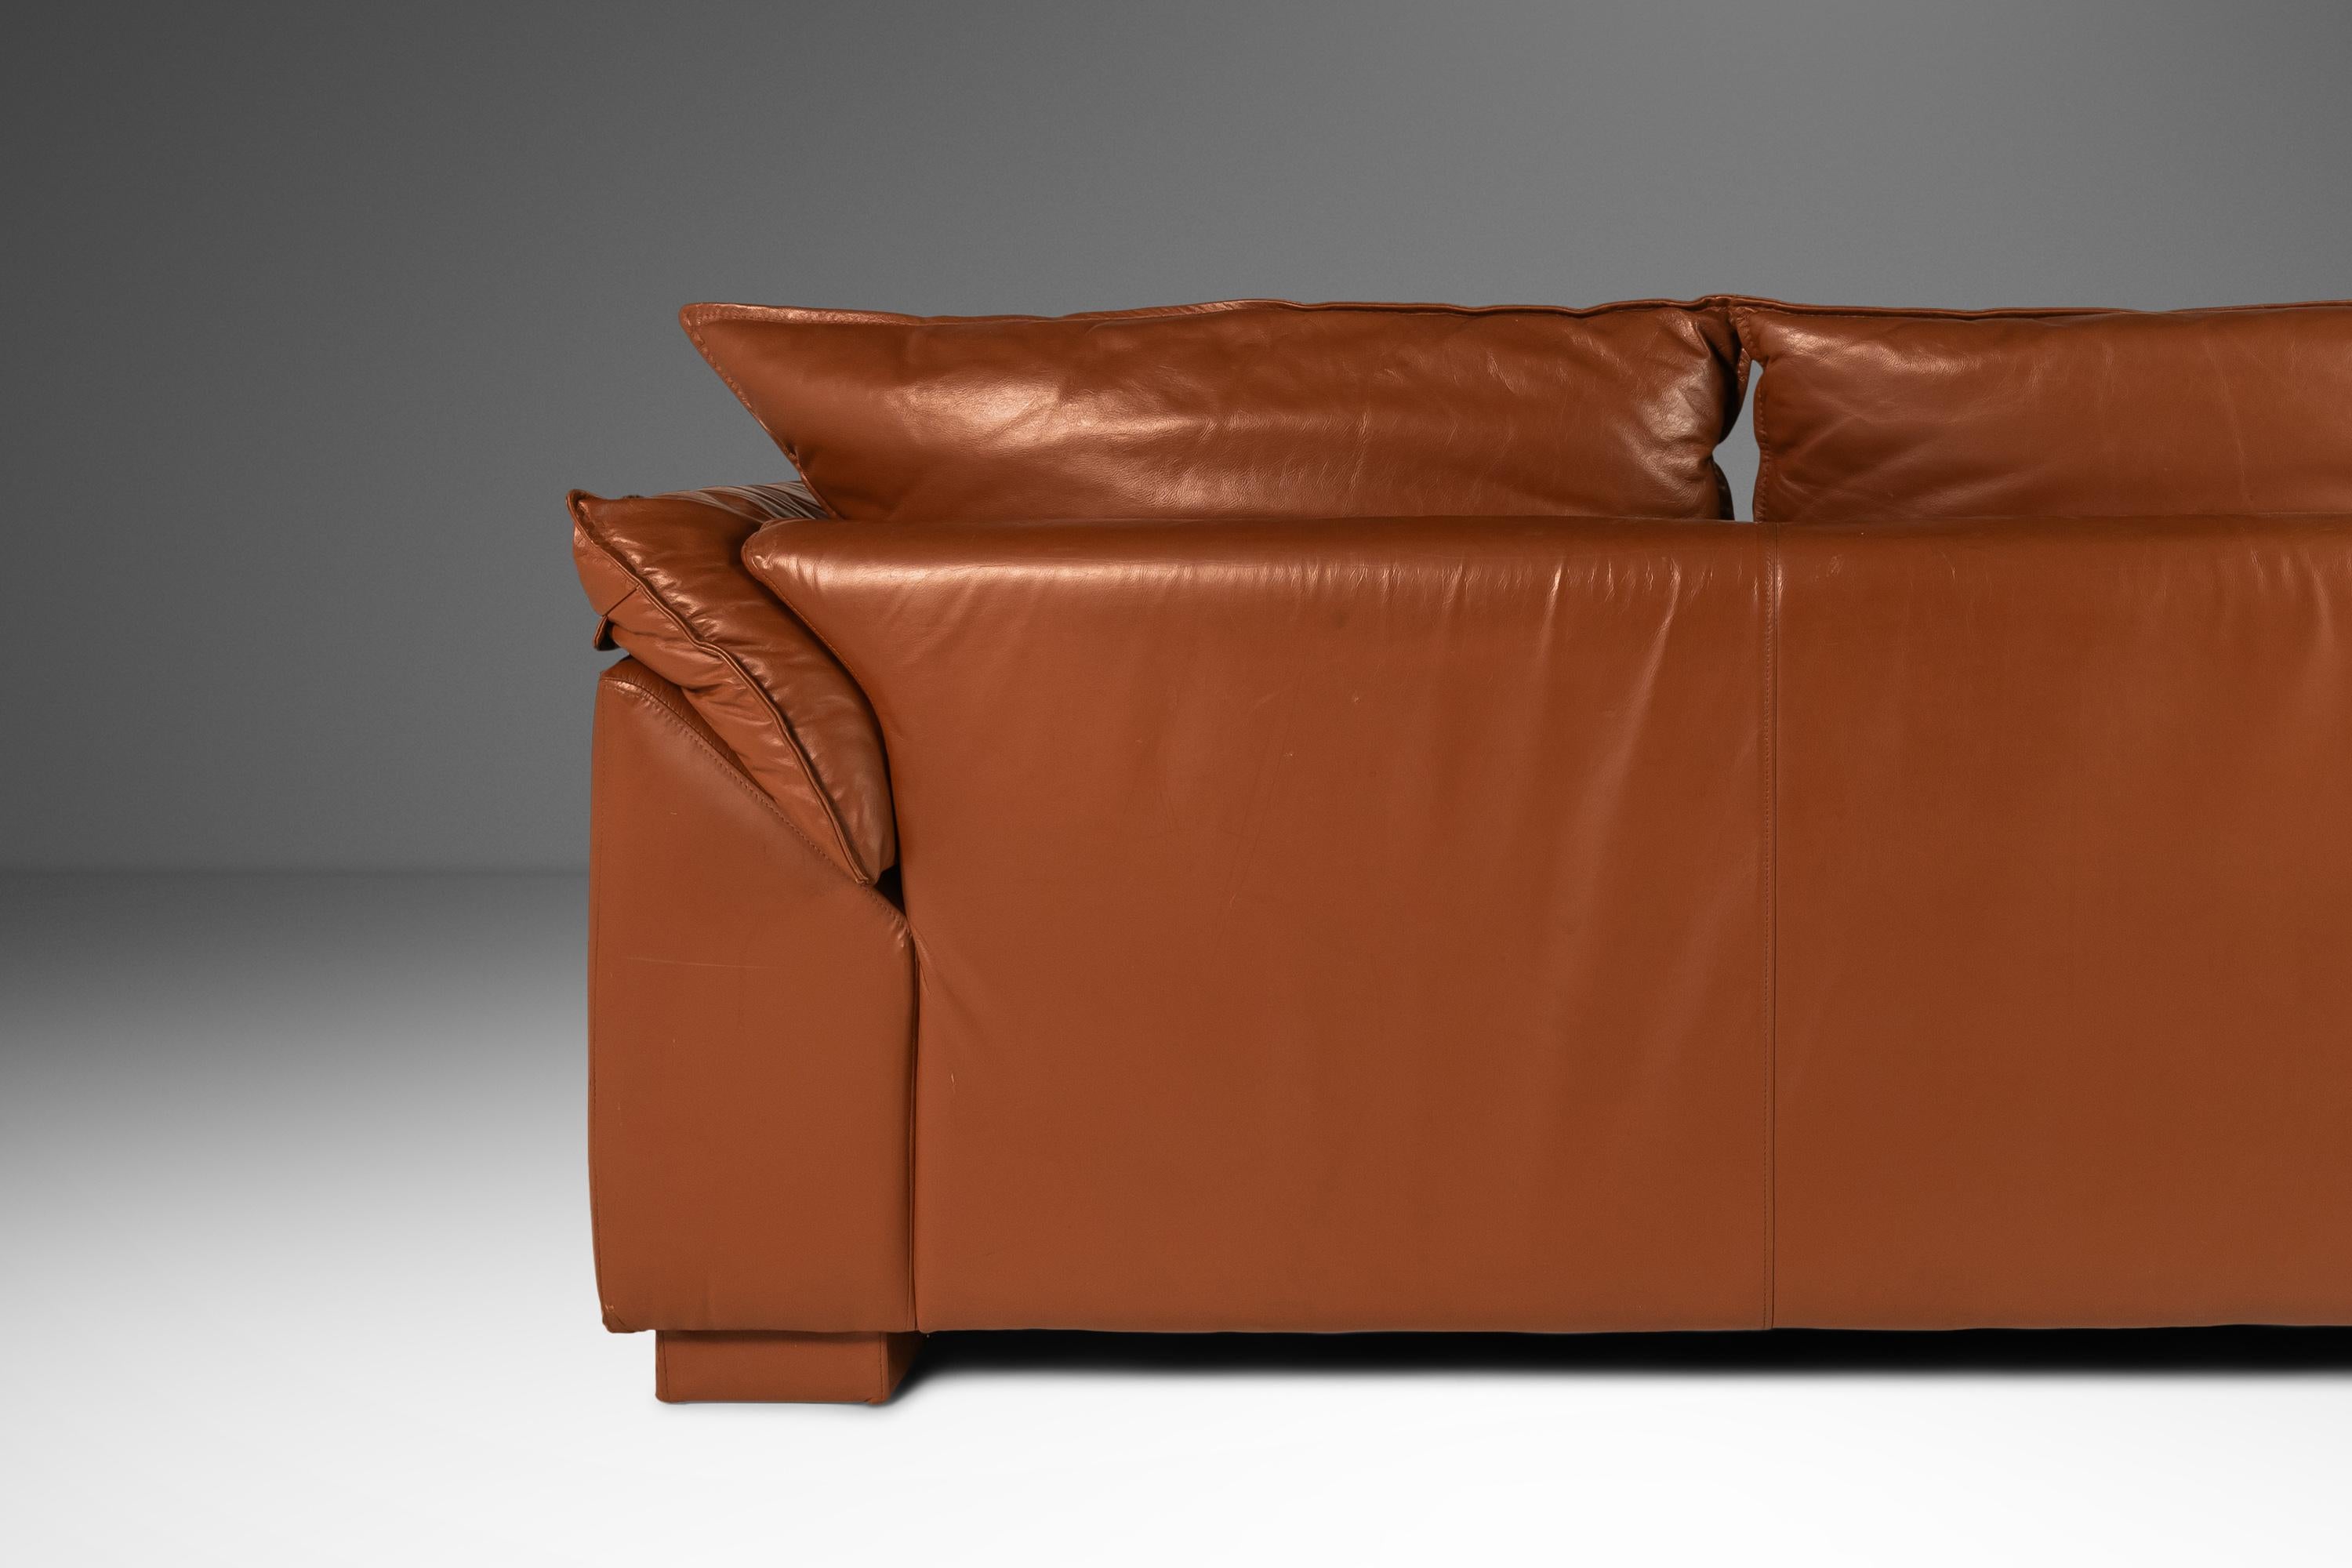 Low Profile Loveseat Sofa in Leather in the Manner of Niels Eilersen, c. 1980's For Sale 6